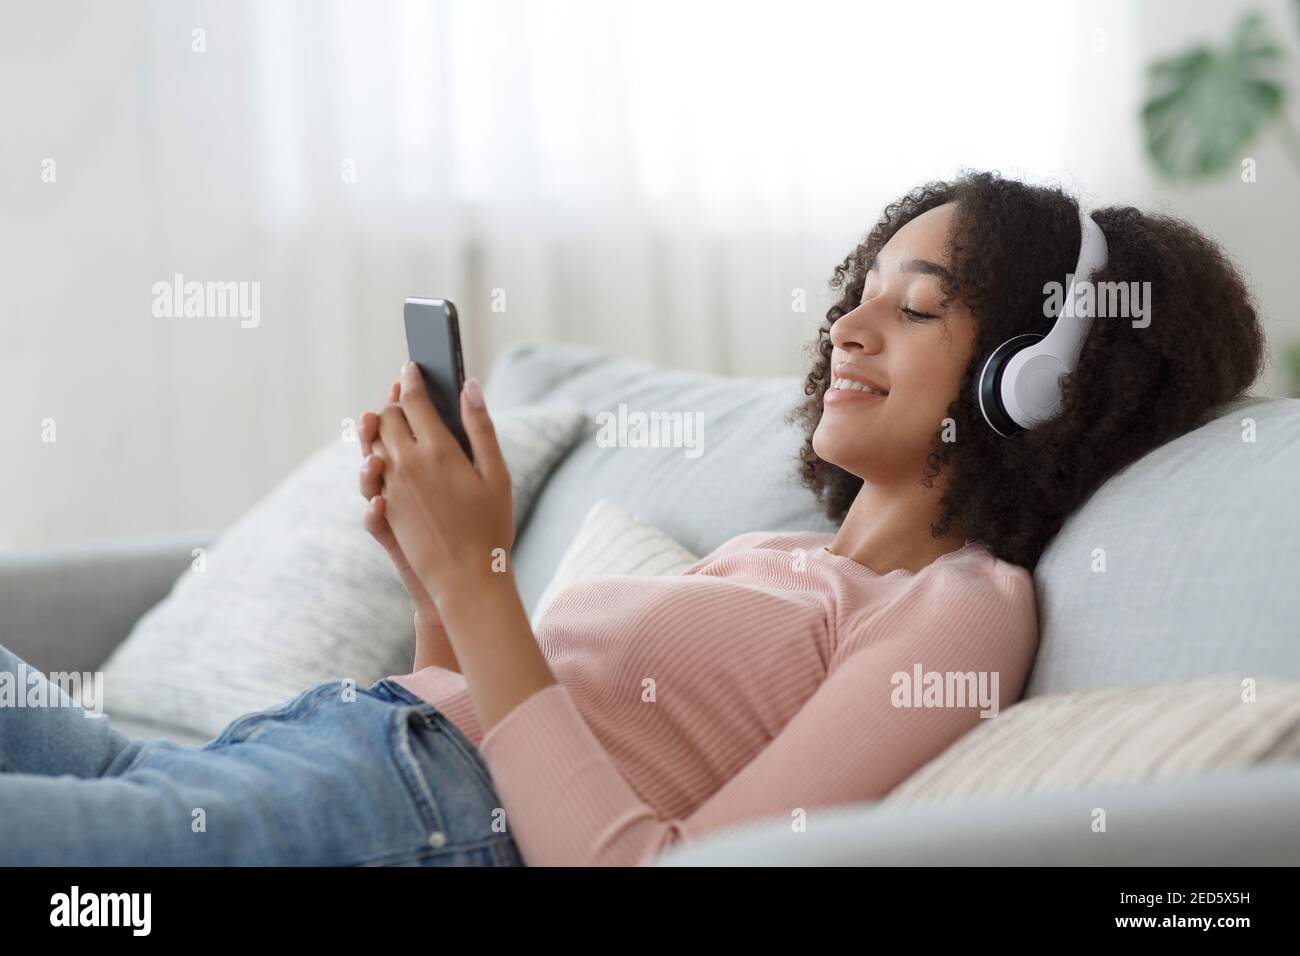 Break and relax at home in free time at weekend Stock Photo